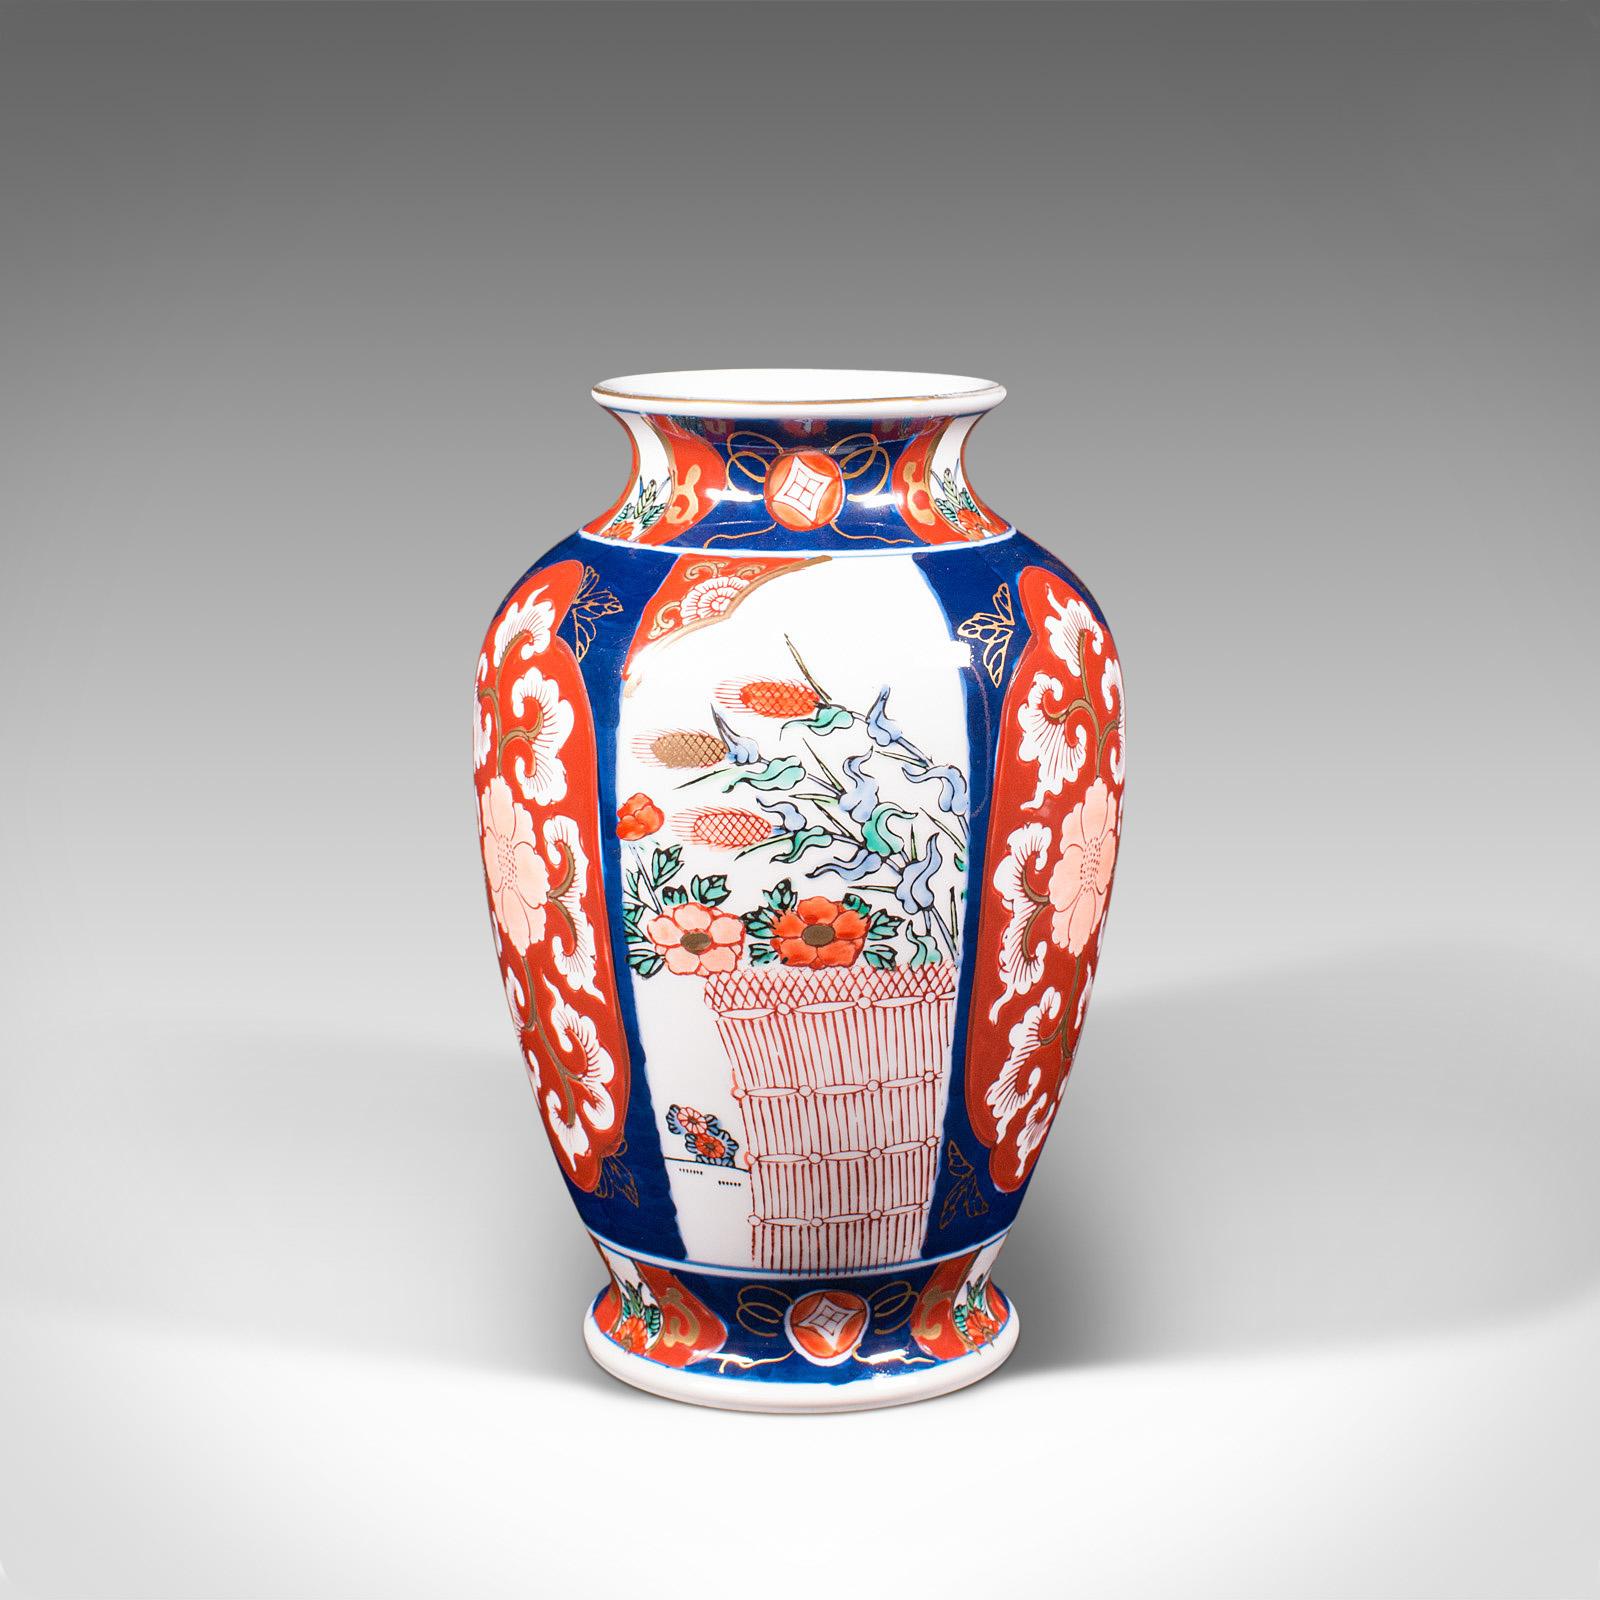 This is a vintage Imari vase. A Japanese, ceramic baluster urn, dating to the late Art Deco period, circa 1940.

Appealing vase in the distinguished Imari taste
Displaying a desirable aged patina and in good order
Full, consistent colour and